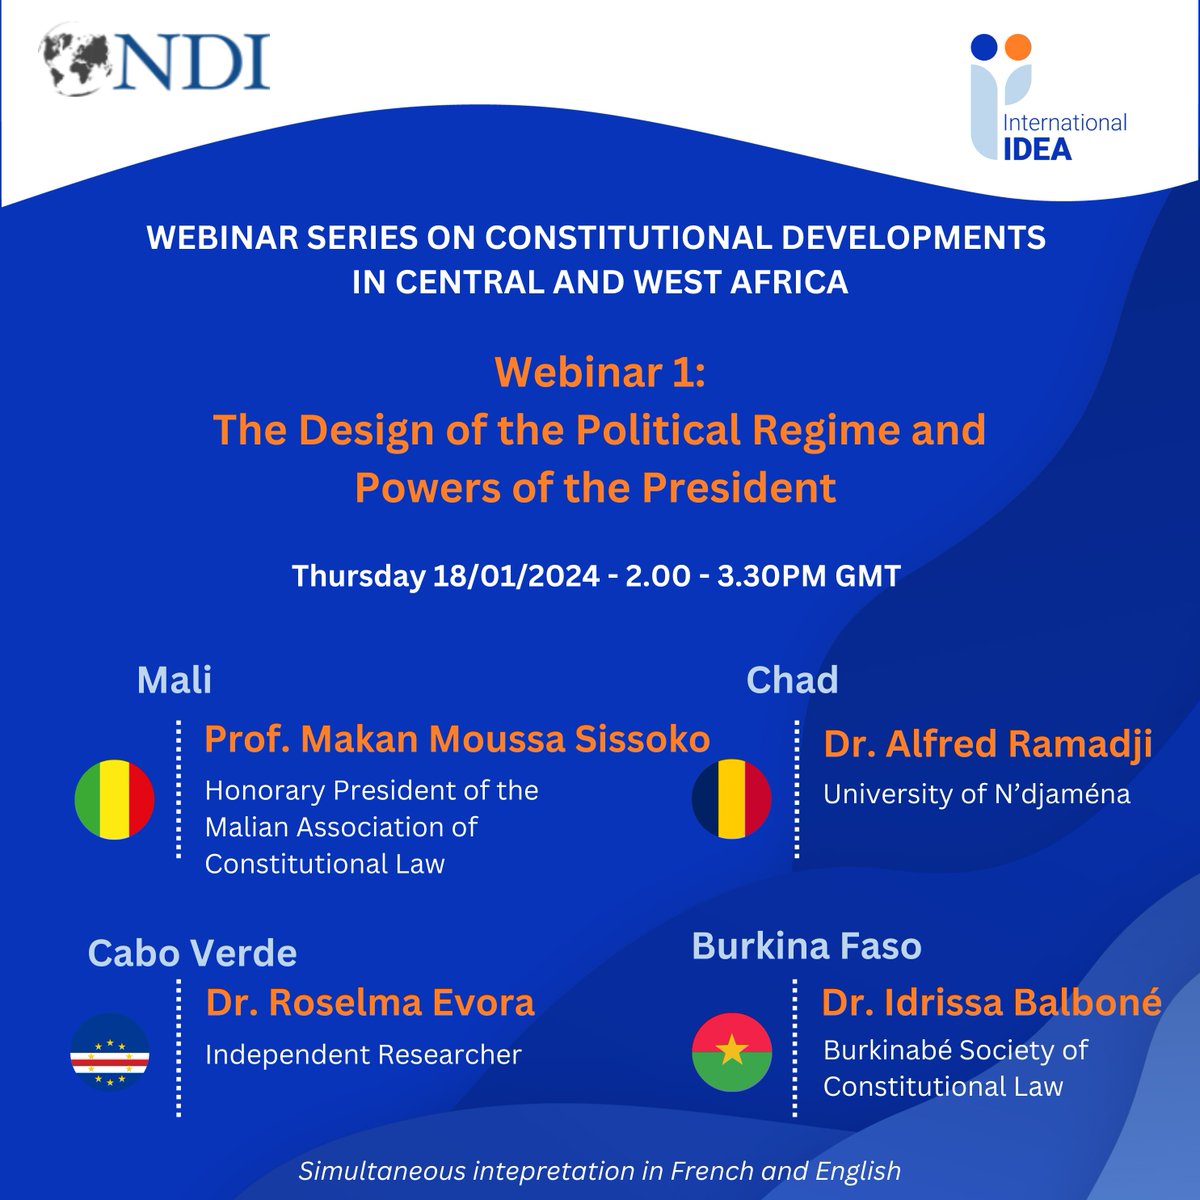 🔔 Today at 2.00PM GMT / 3.00PM CET @NDI and @Int_IDEA are hosting a webinar w/ experts from Mali, Chad, Burkina Faso and Cabo Verde to discuss political regime and presidential powers 📍 Zoom link: us02web.zoom.us/j/82253177240